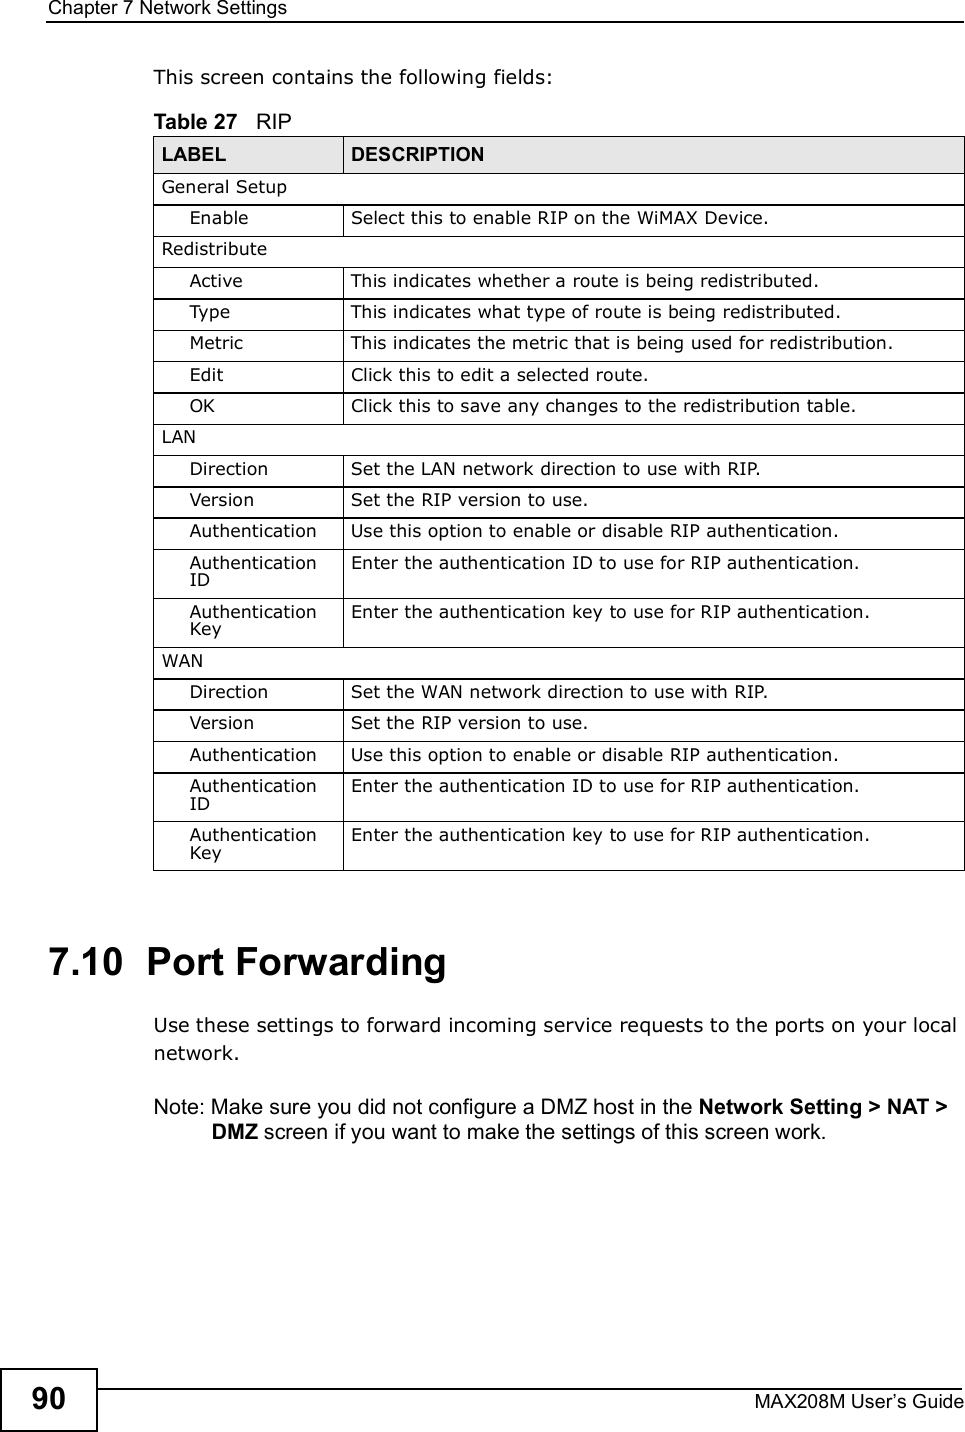 Chapter 7Network SettingsMAX208M User s Guide90This screen contains the following fields:7.10  Port ForwardingUse these settings to forward incoming service requests to the ports on your local network.Note: Make sure you did not configure a DMZ host in the Network Setting &gt; NAT &gt; DMZ screen if you want to make the settings of this screen work.Table 27   RIPLABEL DESCRIPTIONGeneral SetupEnableSelect this to enable RIP on the WiMAX Device.RedistributeActiveThis indicates whether a route is being redistributed.TypeThis indicates what type of route is being redistributed.MetricThis indicates the metric that is being used for redistribution.EditClick this to edit a selected route.OKClick this to save any changes to the redistribution table.LANDirectionSet the LAN network direction to use with RIP.VersionSet the RIP version to use.AuthenticationUse this option to enable or disable RIP authentication.Authentication IDEnter the authentication ID to use for RIP authentication.Authentication KeyEnter the authentication key to use for RIP authentication.WANDirectionSet the WAN network direction to use with RIP.VersionSet the RIP version to use.AuthenticationUse this option to enable or disable RIP authentication.Authentication IDEnter the authentication ID to use for RIP authentication.Authentication KeyEnter the authentication key to use for RIP authentication.